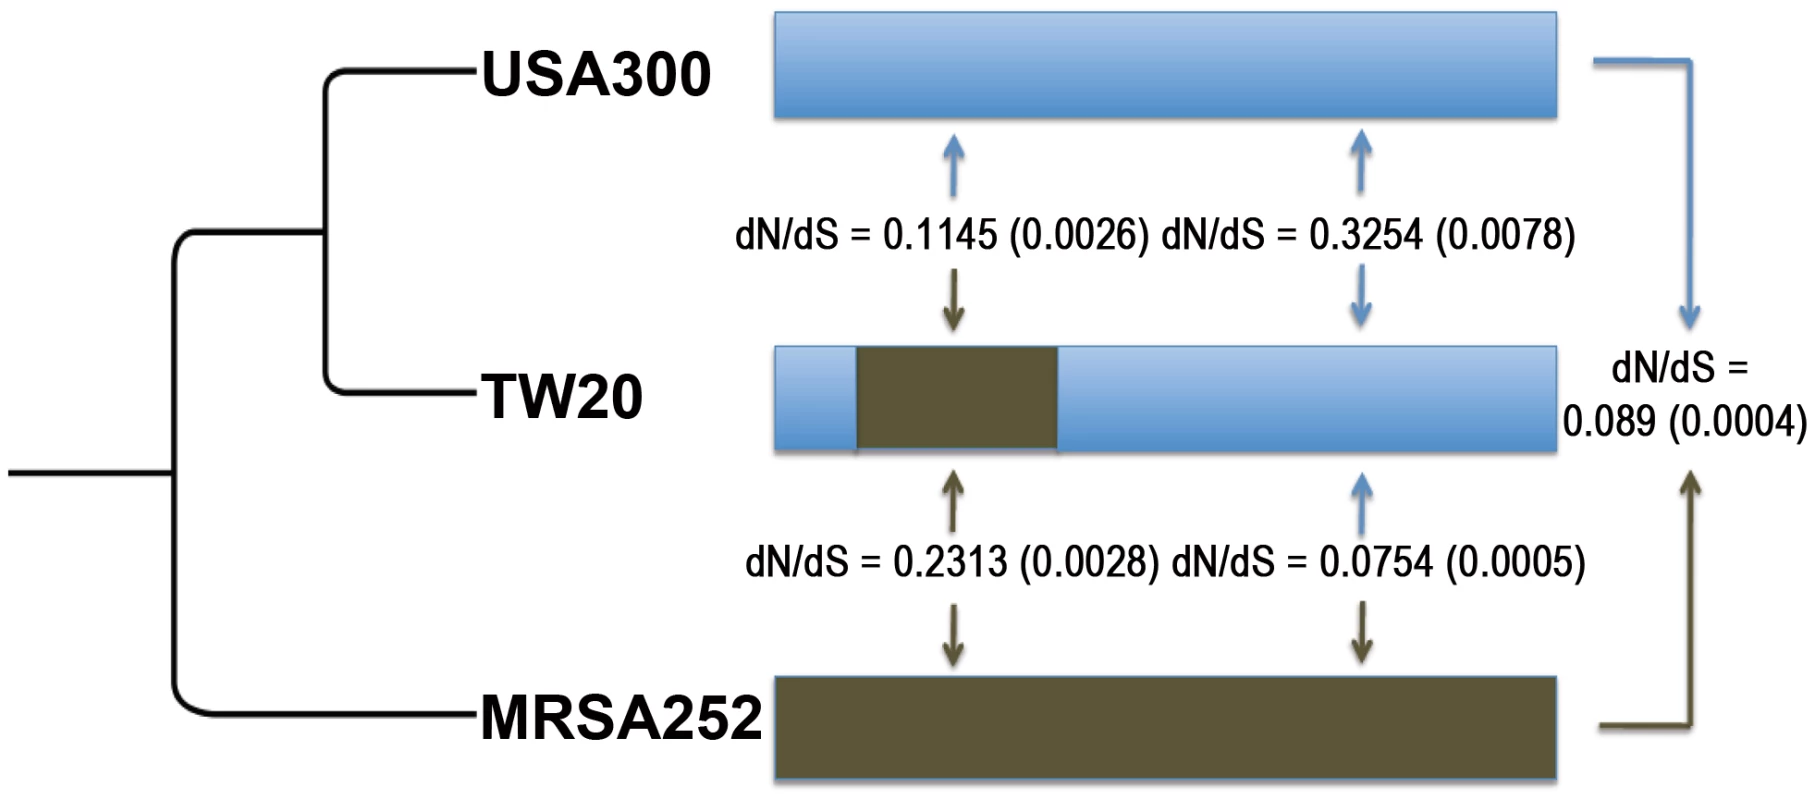 Mean dN/dS values are shown (with standard errors in parentheses) between <i>S. aureus</i> ST239 (TW20) and <i>S. aureus</i> USA300 (USA300), and between TW20 and <i>S. aureus</i> MRSA252 (MRSA252).